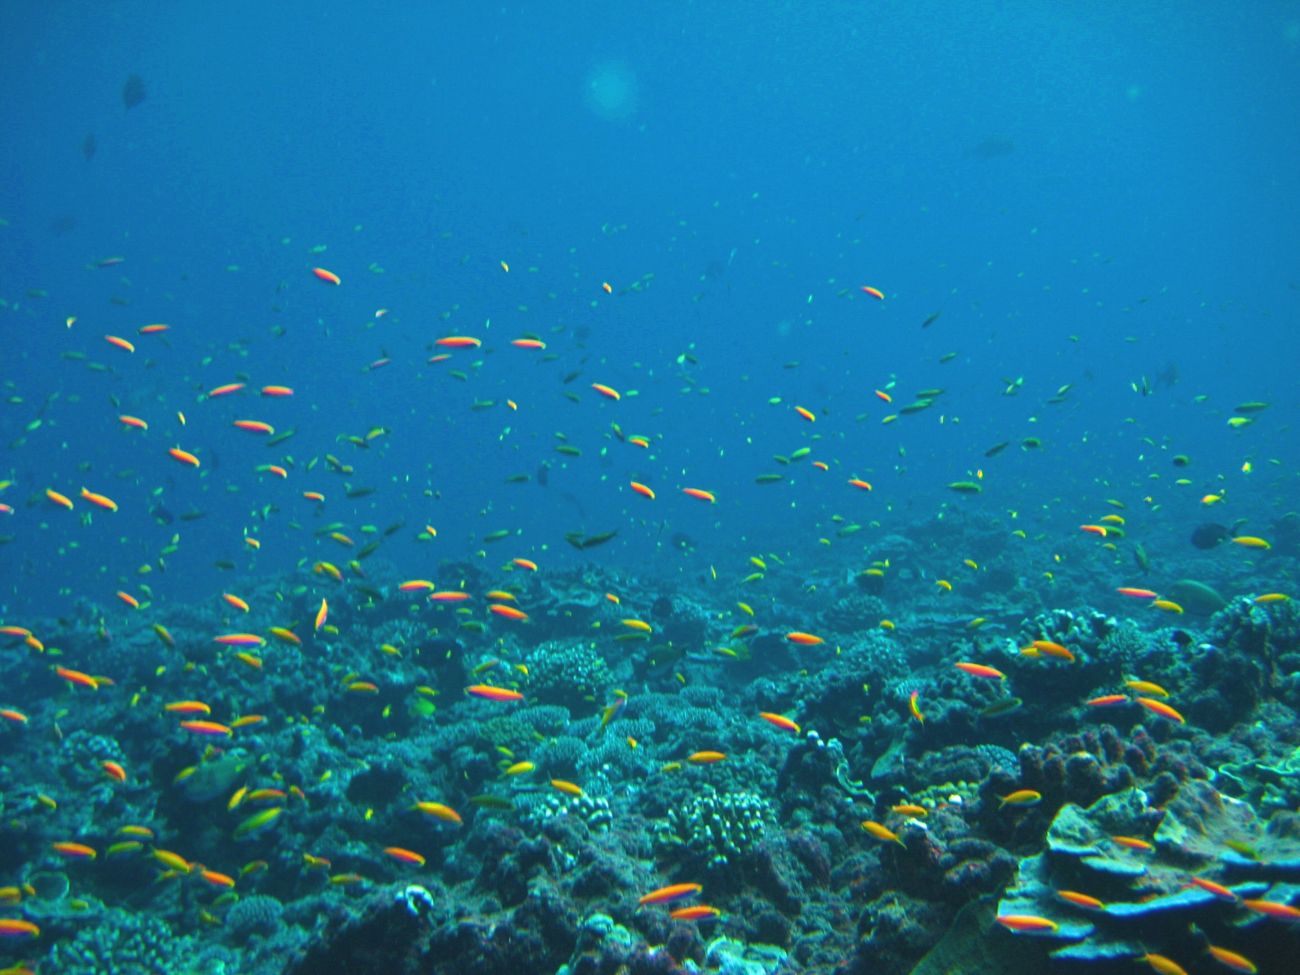 Hundreds of anthias over the reef